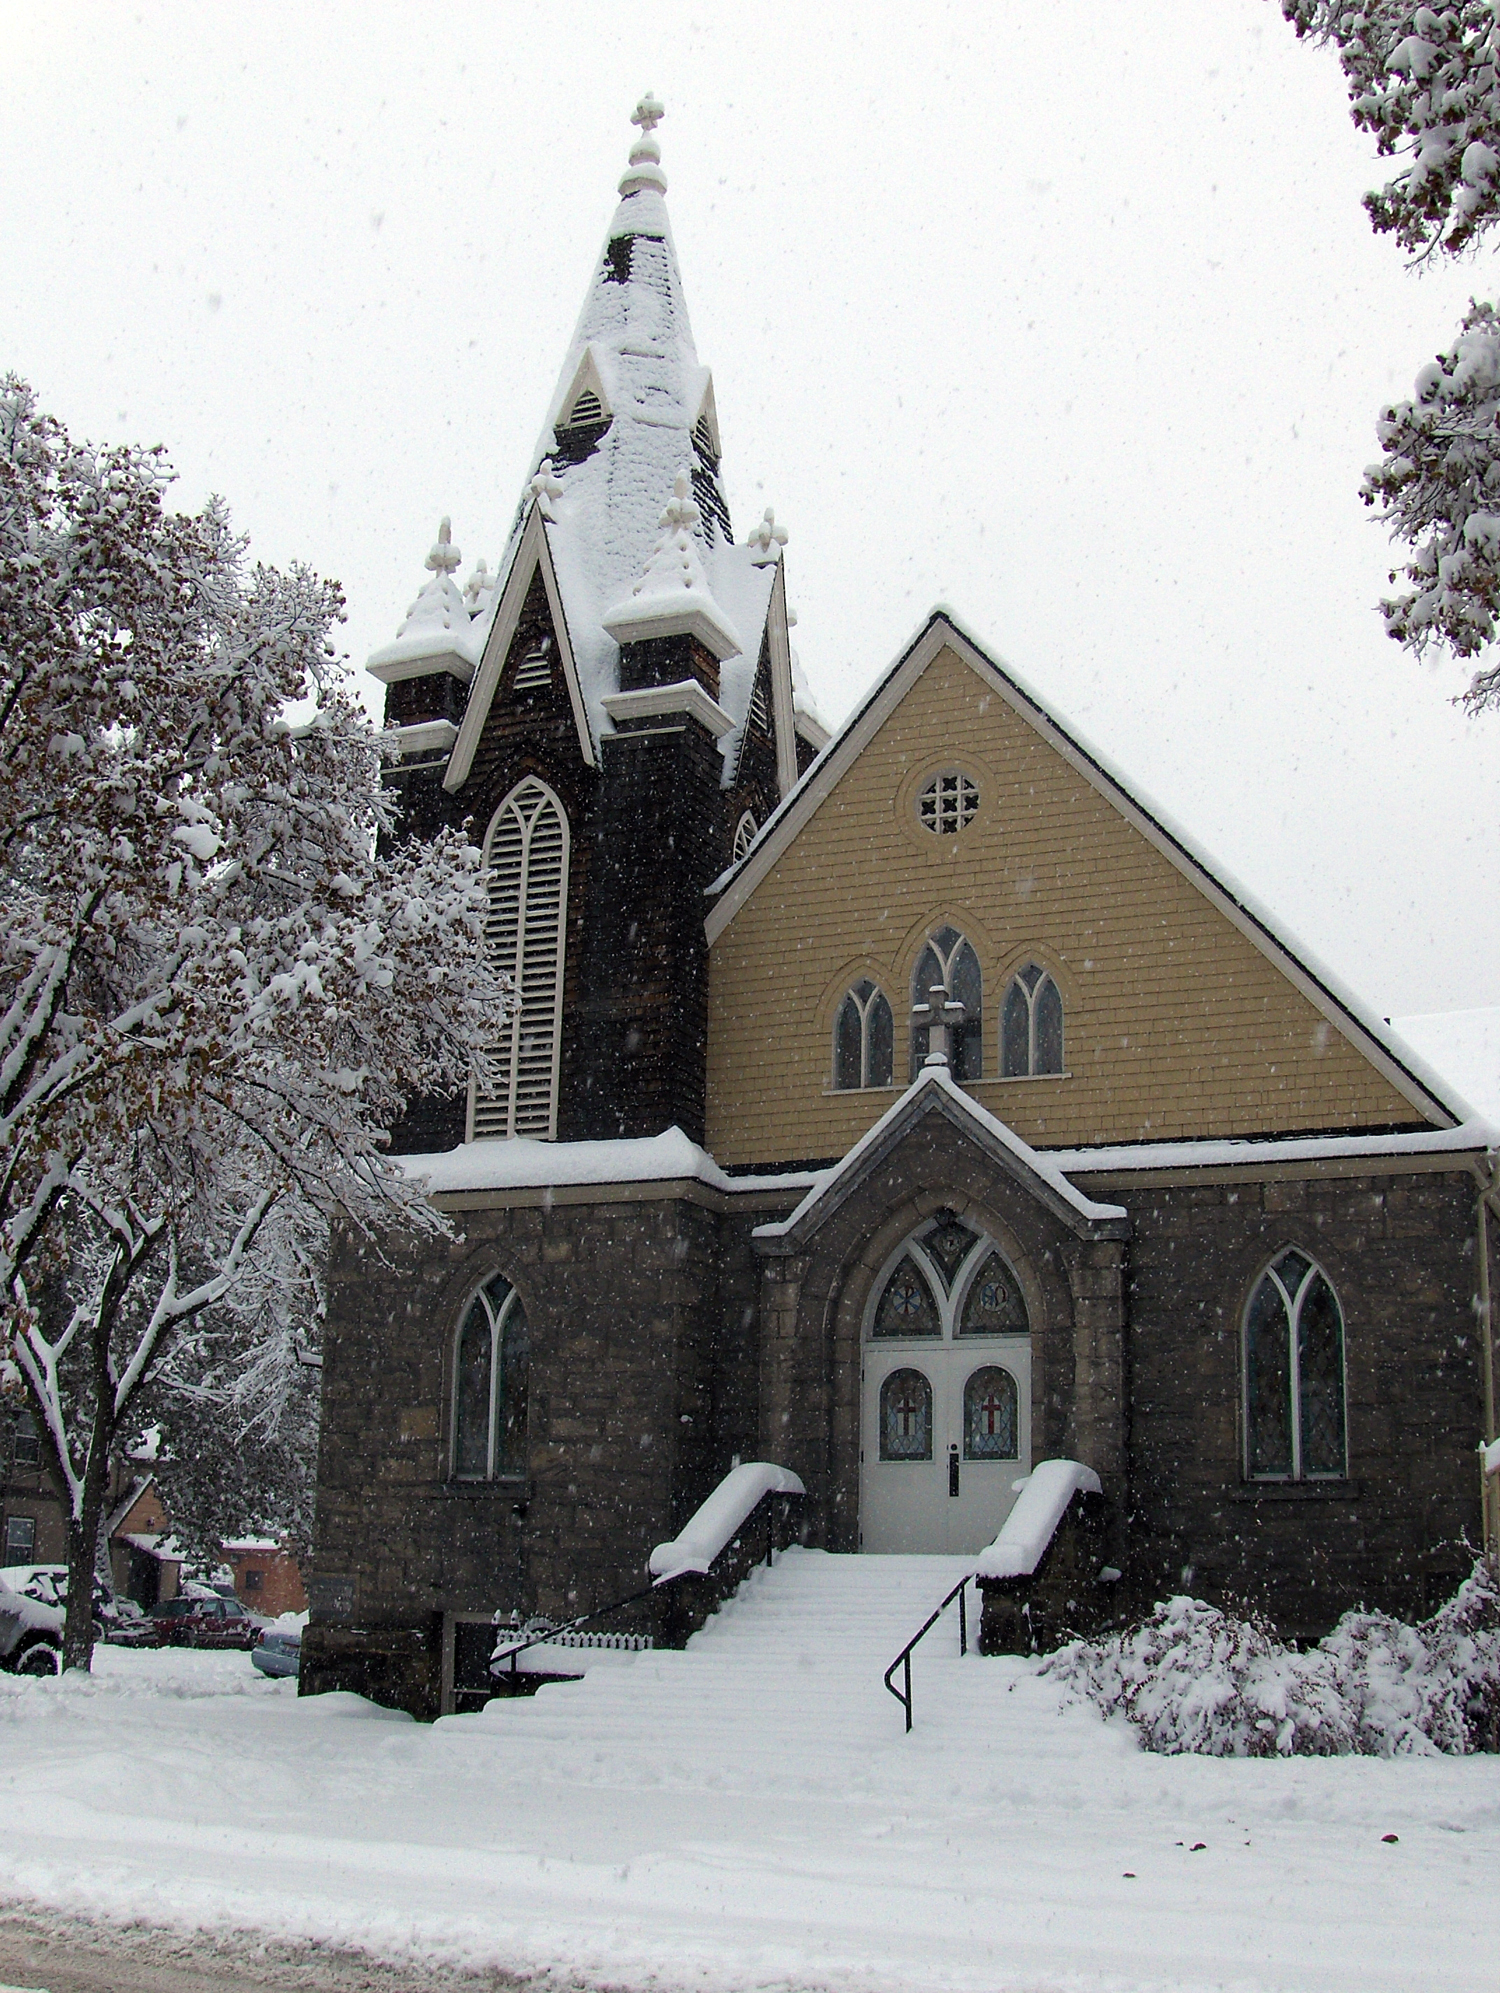 a snowy view of a church with some snow falling